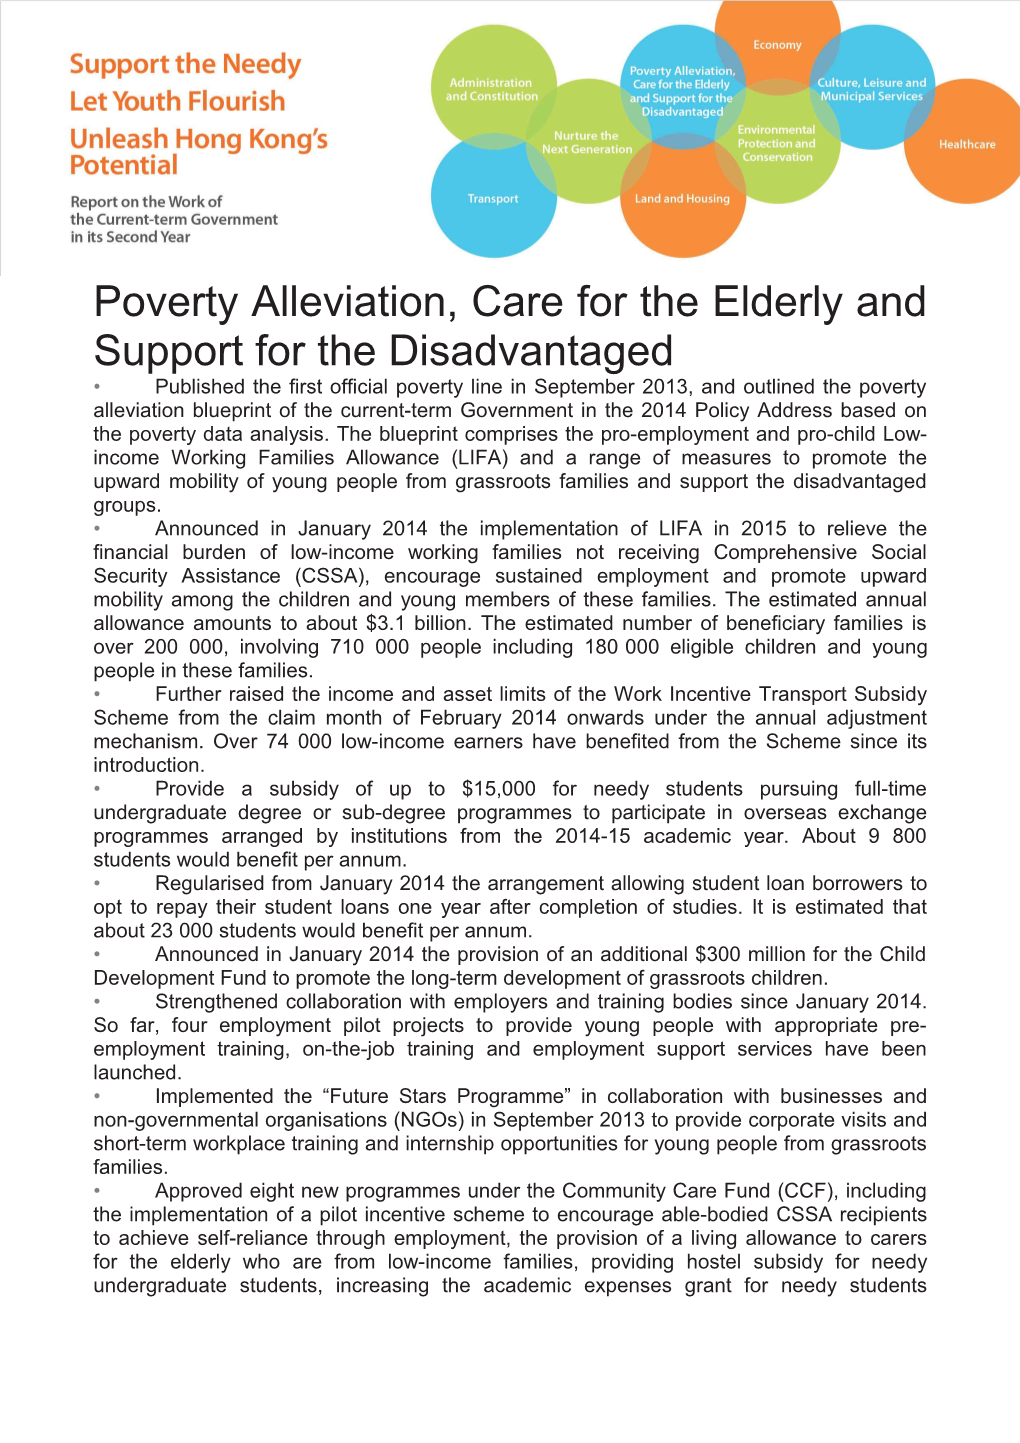 Poverty Alleviation, Care for the Elderly and Support for the Disadvantaged